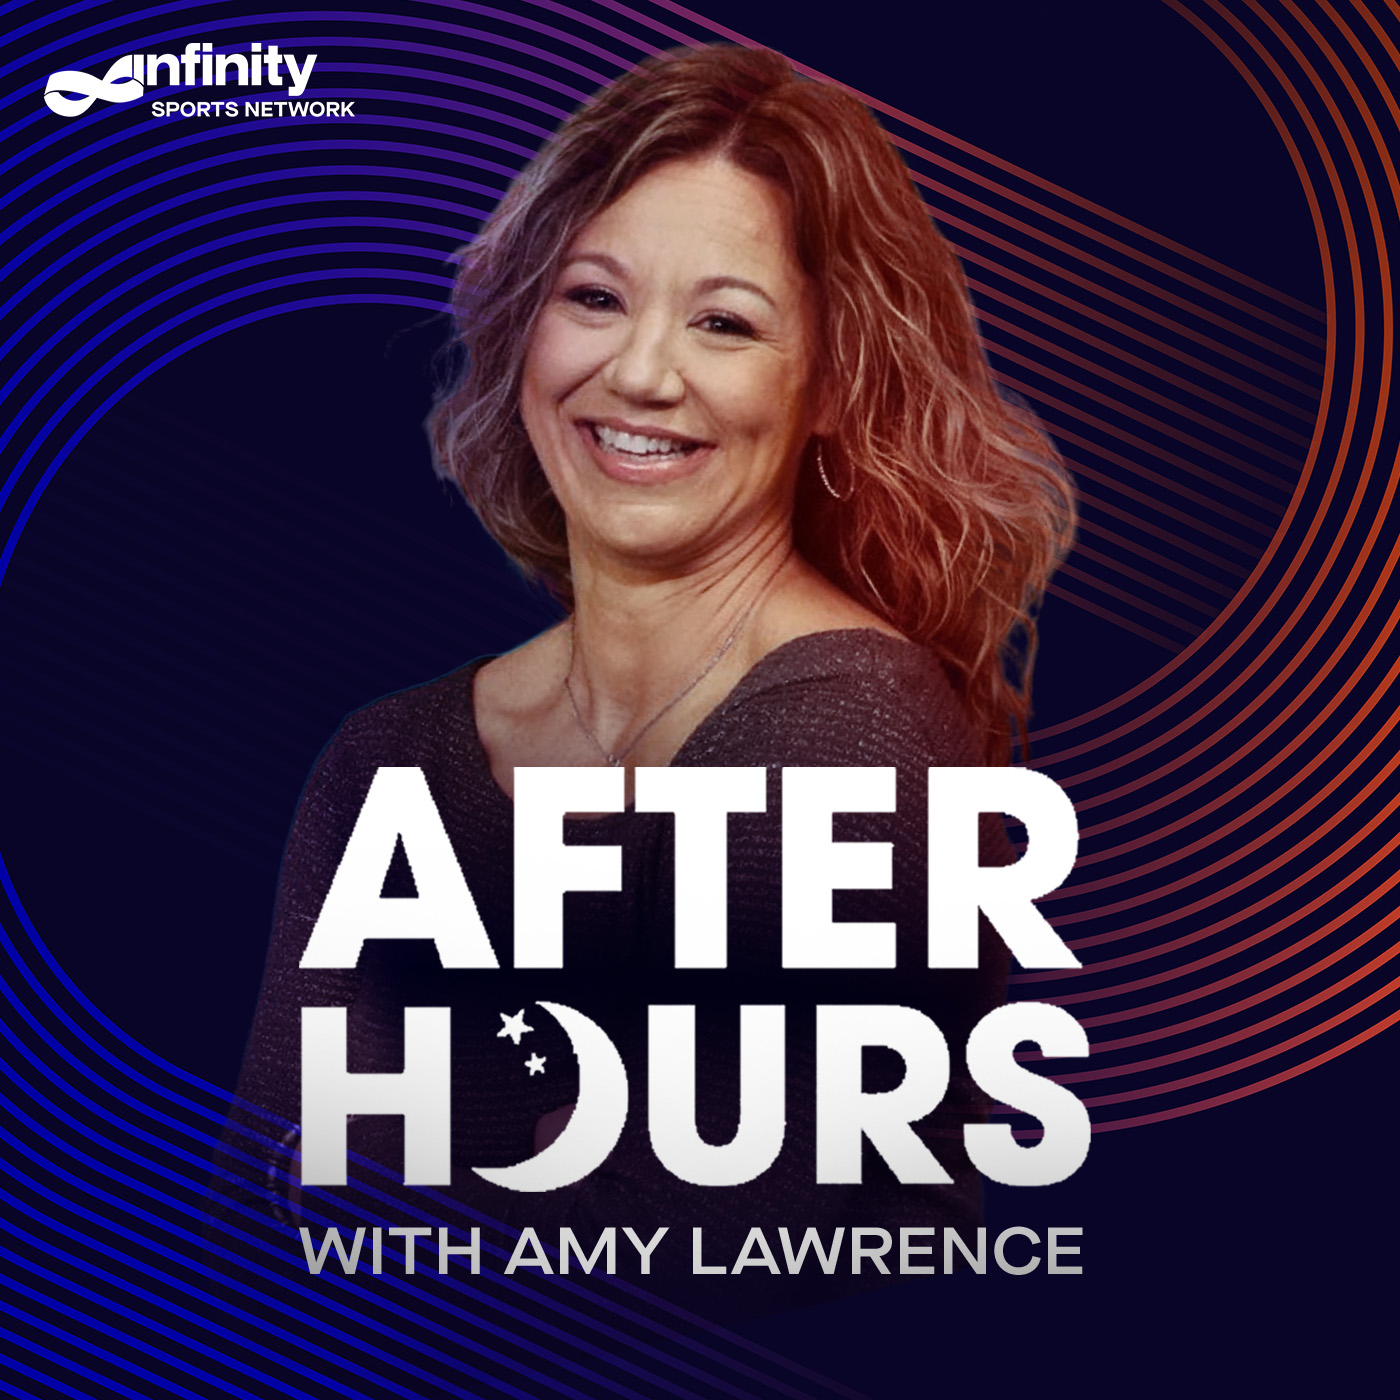 2-22-22 After Hours PODCAST: Hour 3